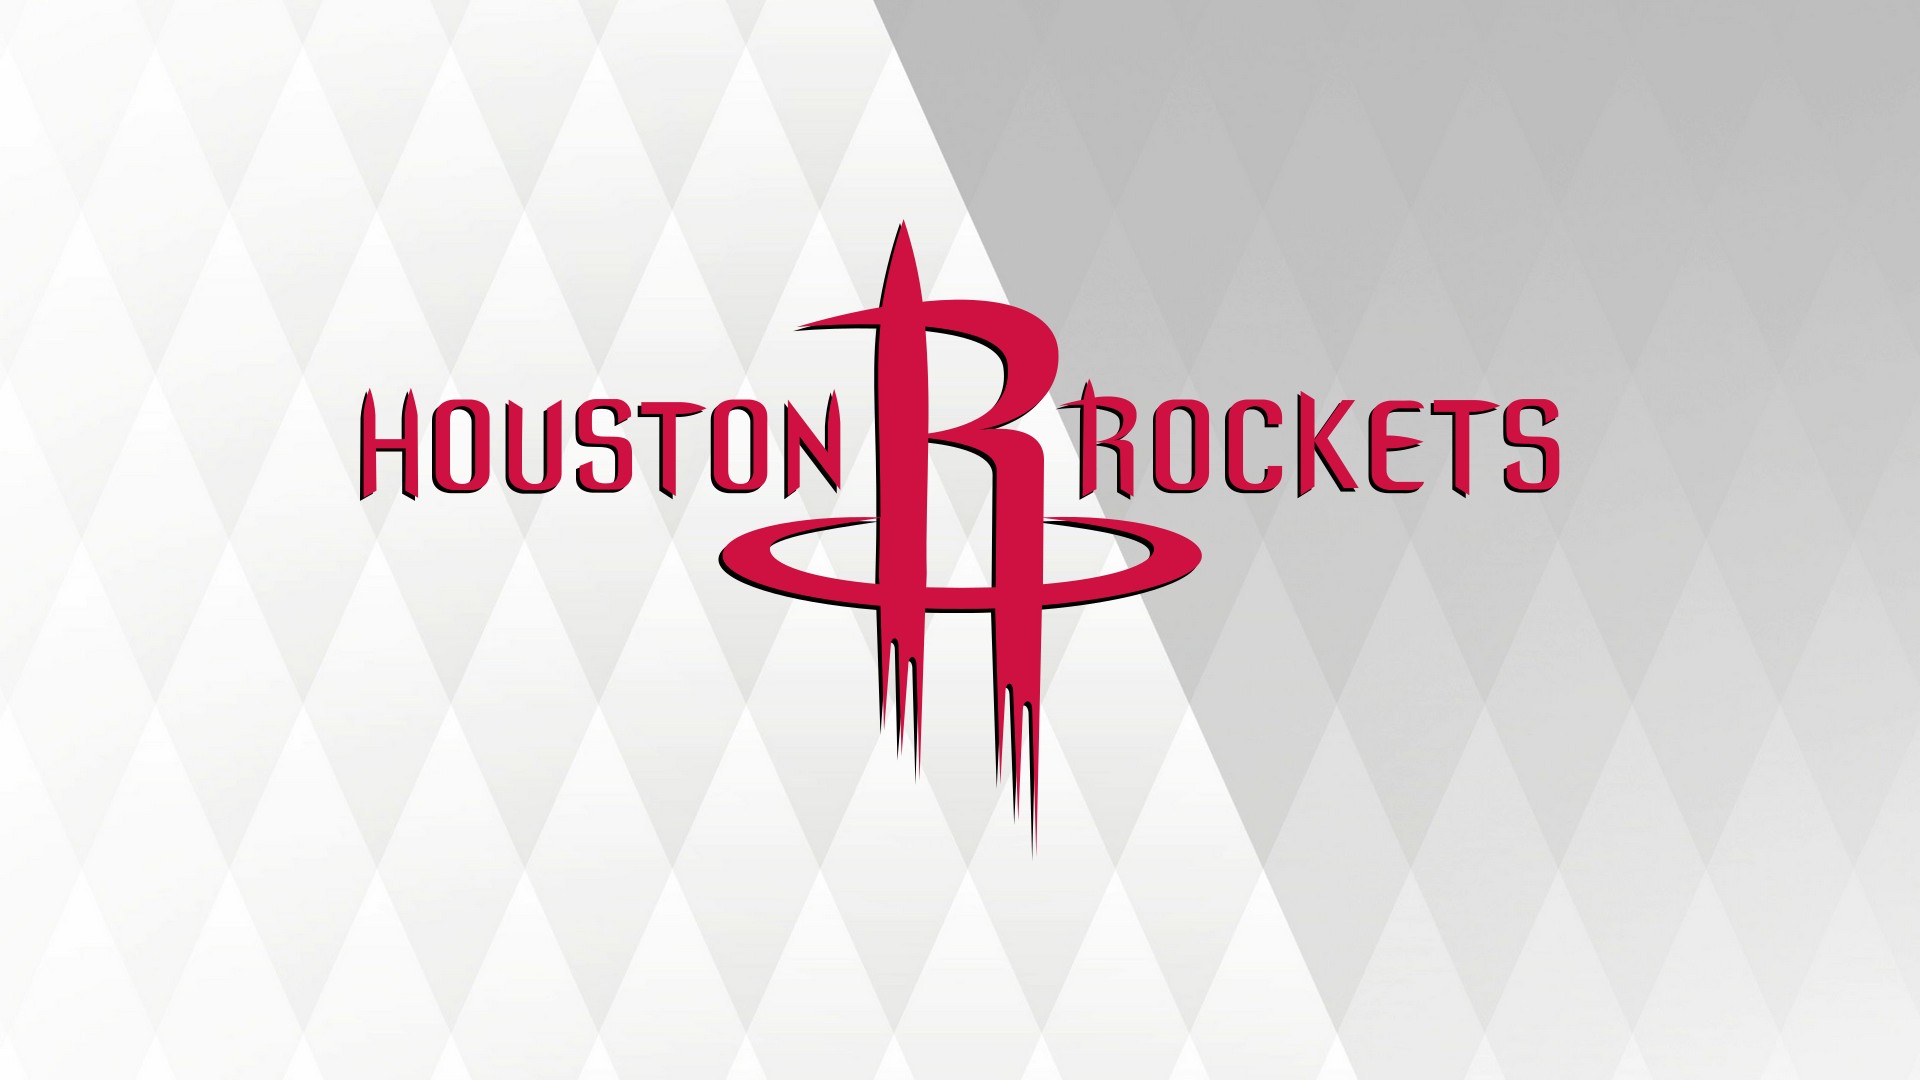 Rockets Desktop Wallpaper with image dimensions 1920x1080 pixel. You can make this wallpaper for your Desktop Computer Backgrounds, Windows or Mac Screensavers, iPhone Lock screen, Tablet or Android and another Mobile Phone device